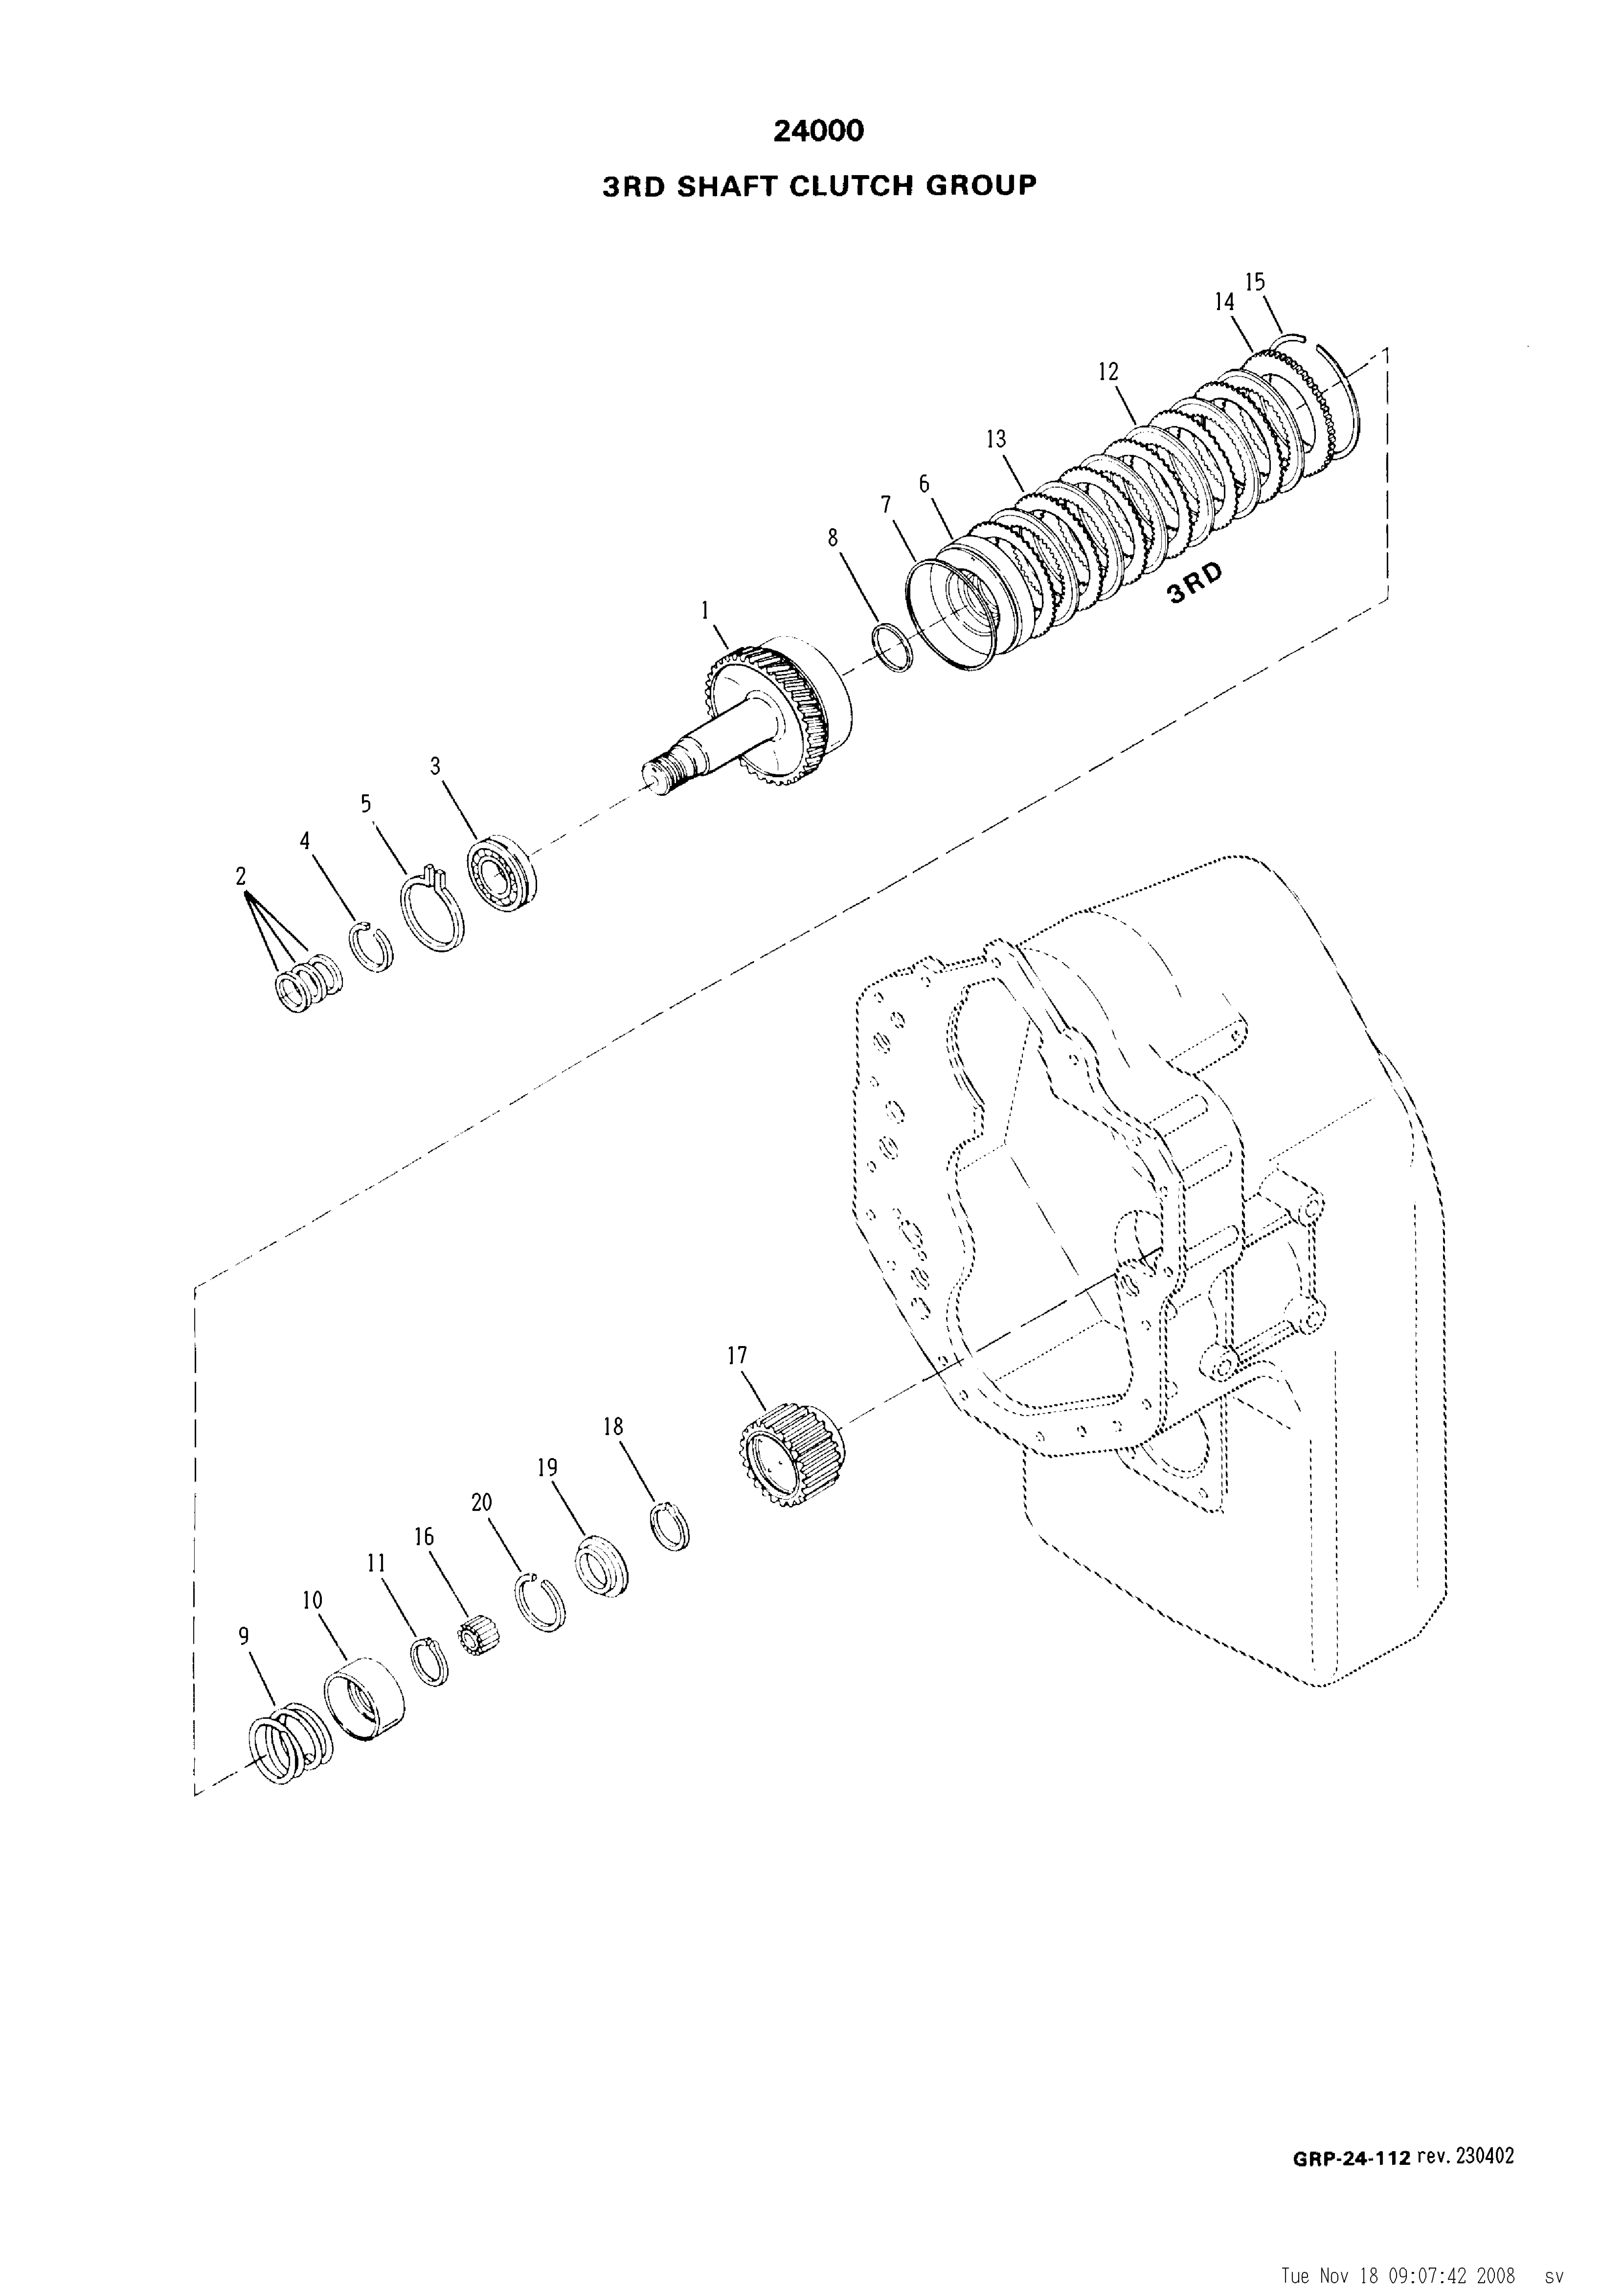 drawing for VALLEE CK234113 - SEAL (figure 3)